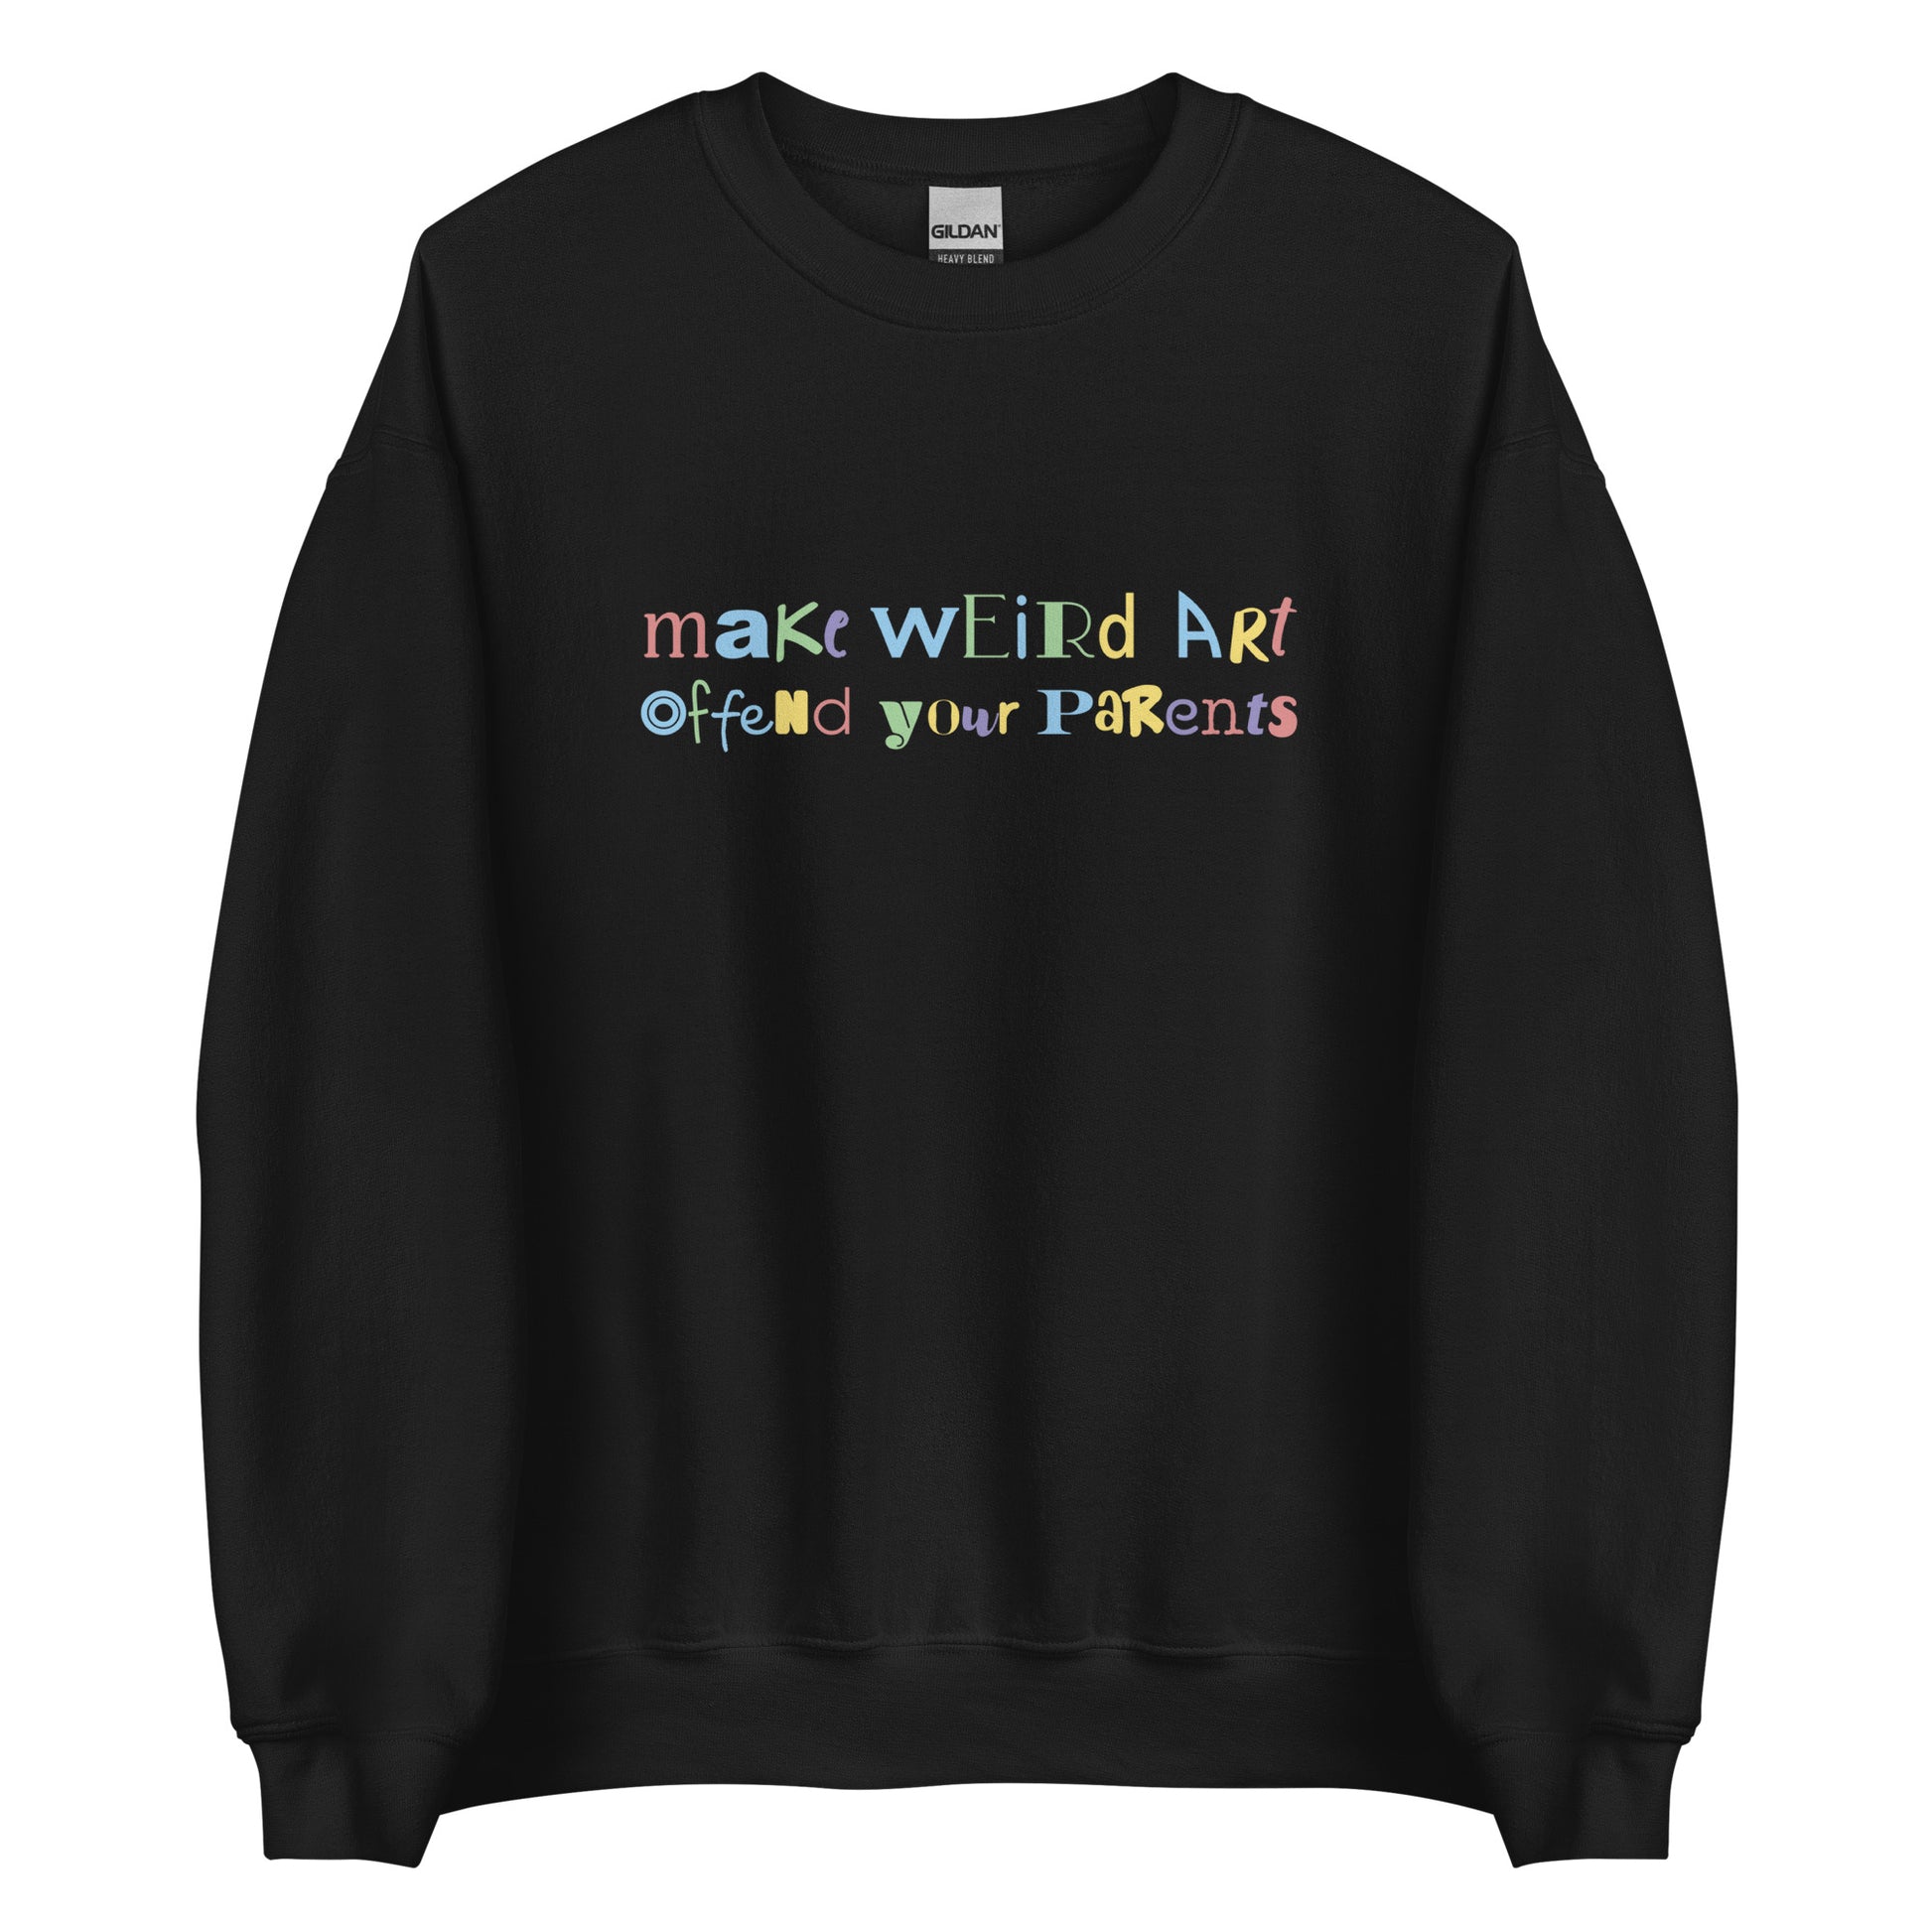 A black crewneck sweatshirt featuring text that reads "make weird art, offend your parents" in varying fonts and colors